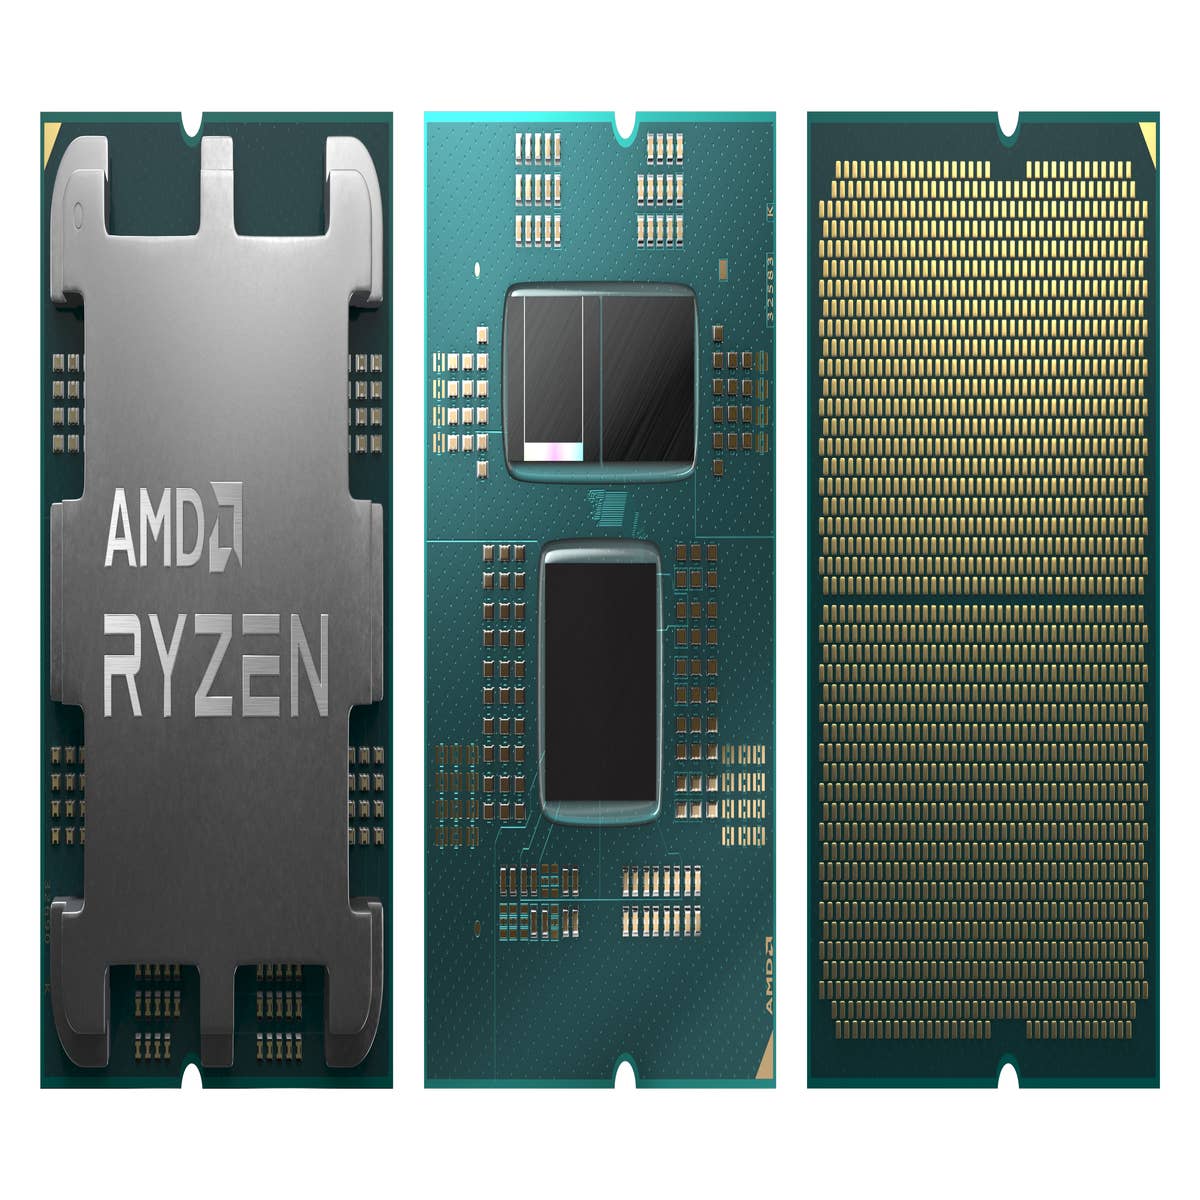 AMD Unveils Ryzen 9 7950X3D, 7900X3D, and Ryzen 7 7800X3D, Up to 128 MB of  L3 Cache And 5.7 GHz Boost